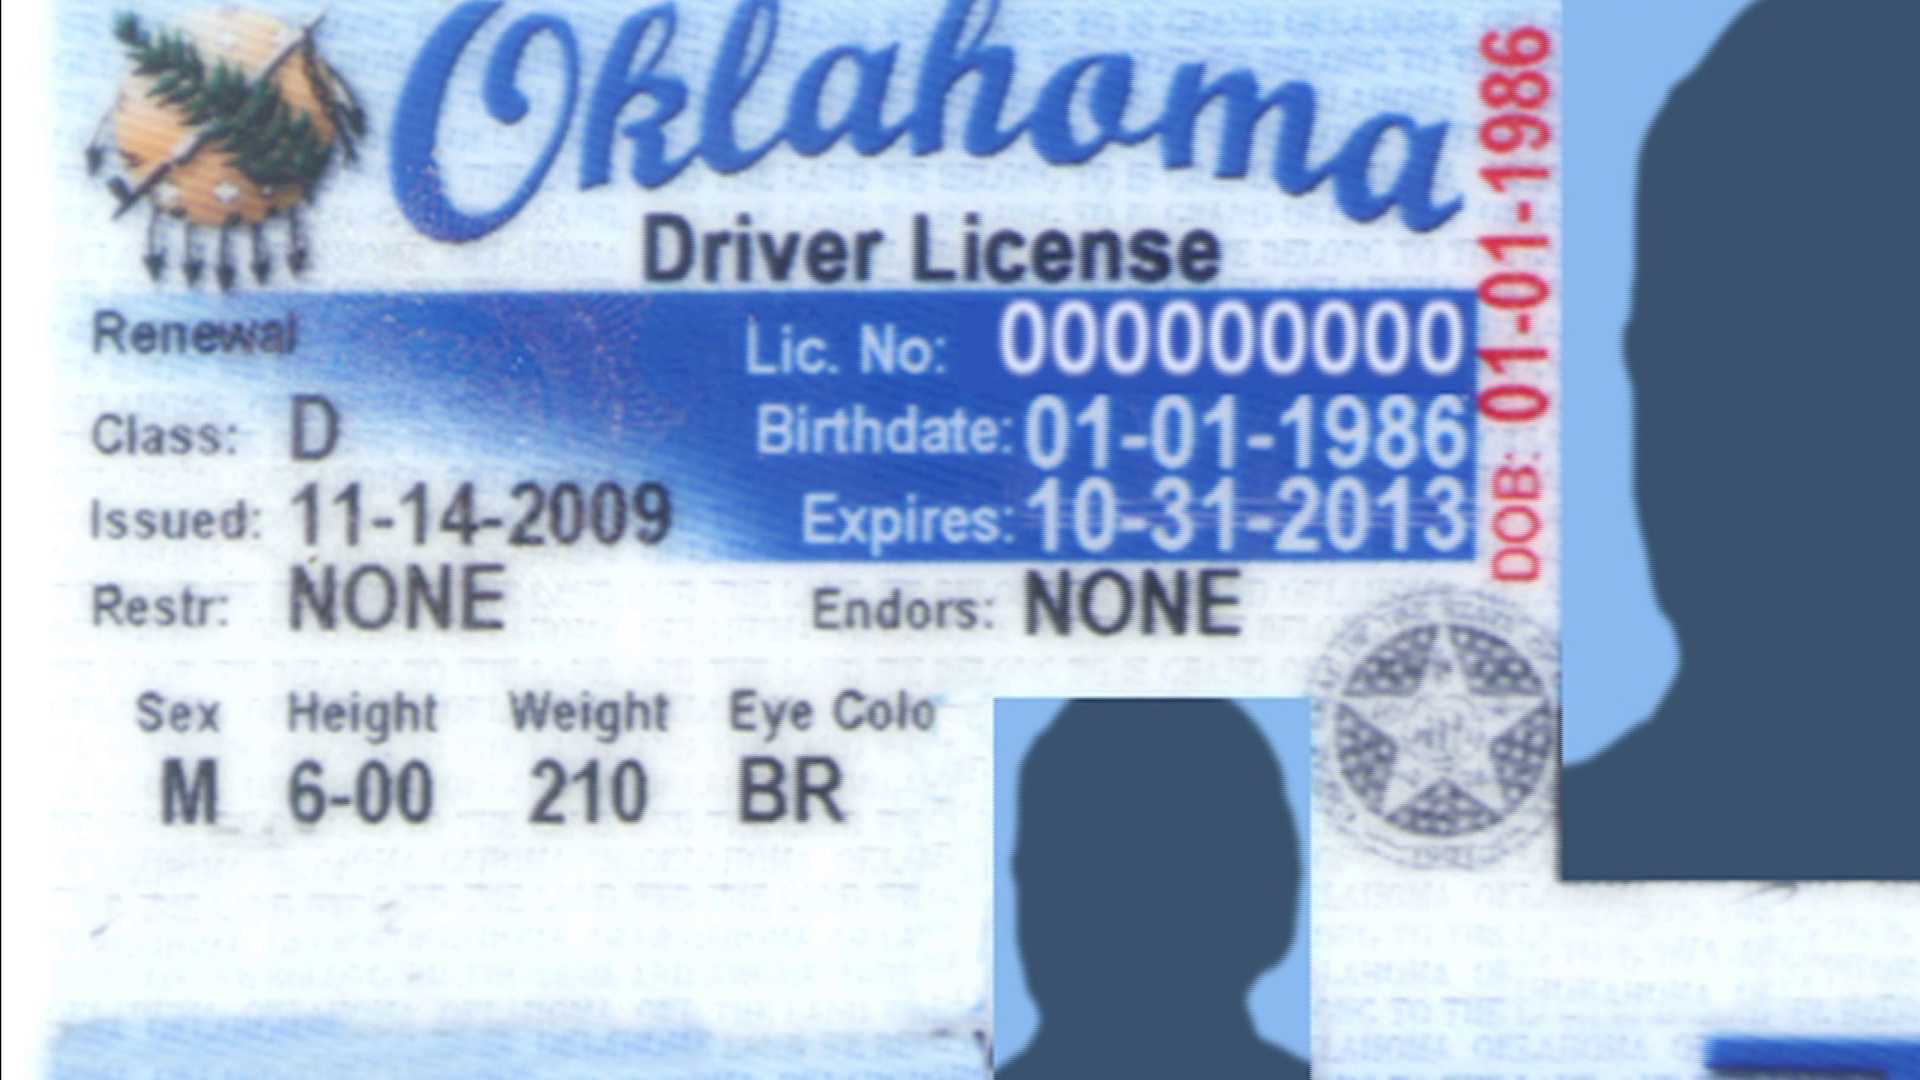 oklahoma drivers license restriction codes a